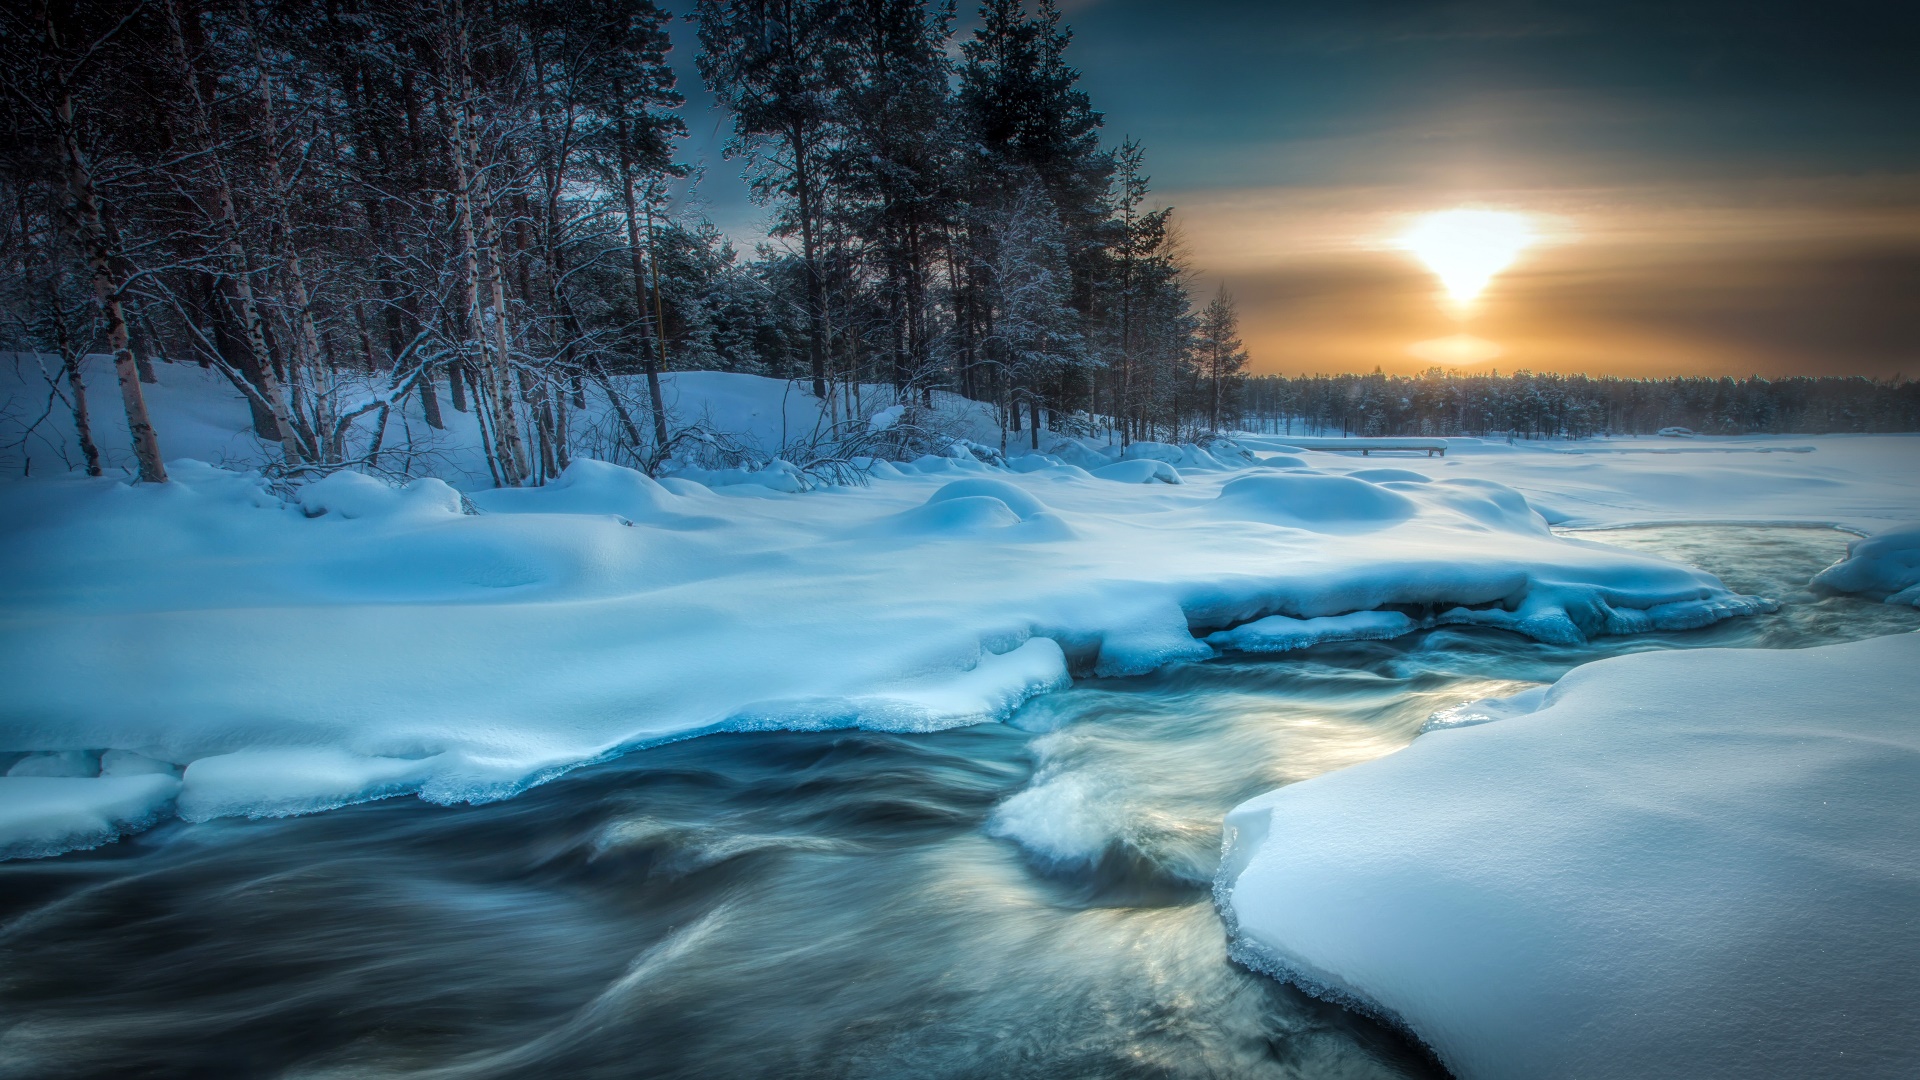 General 1920x1080 cold water winter Sun snow ice trees nature forest long exposure